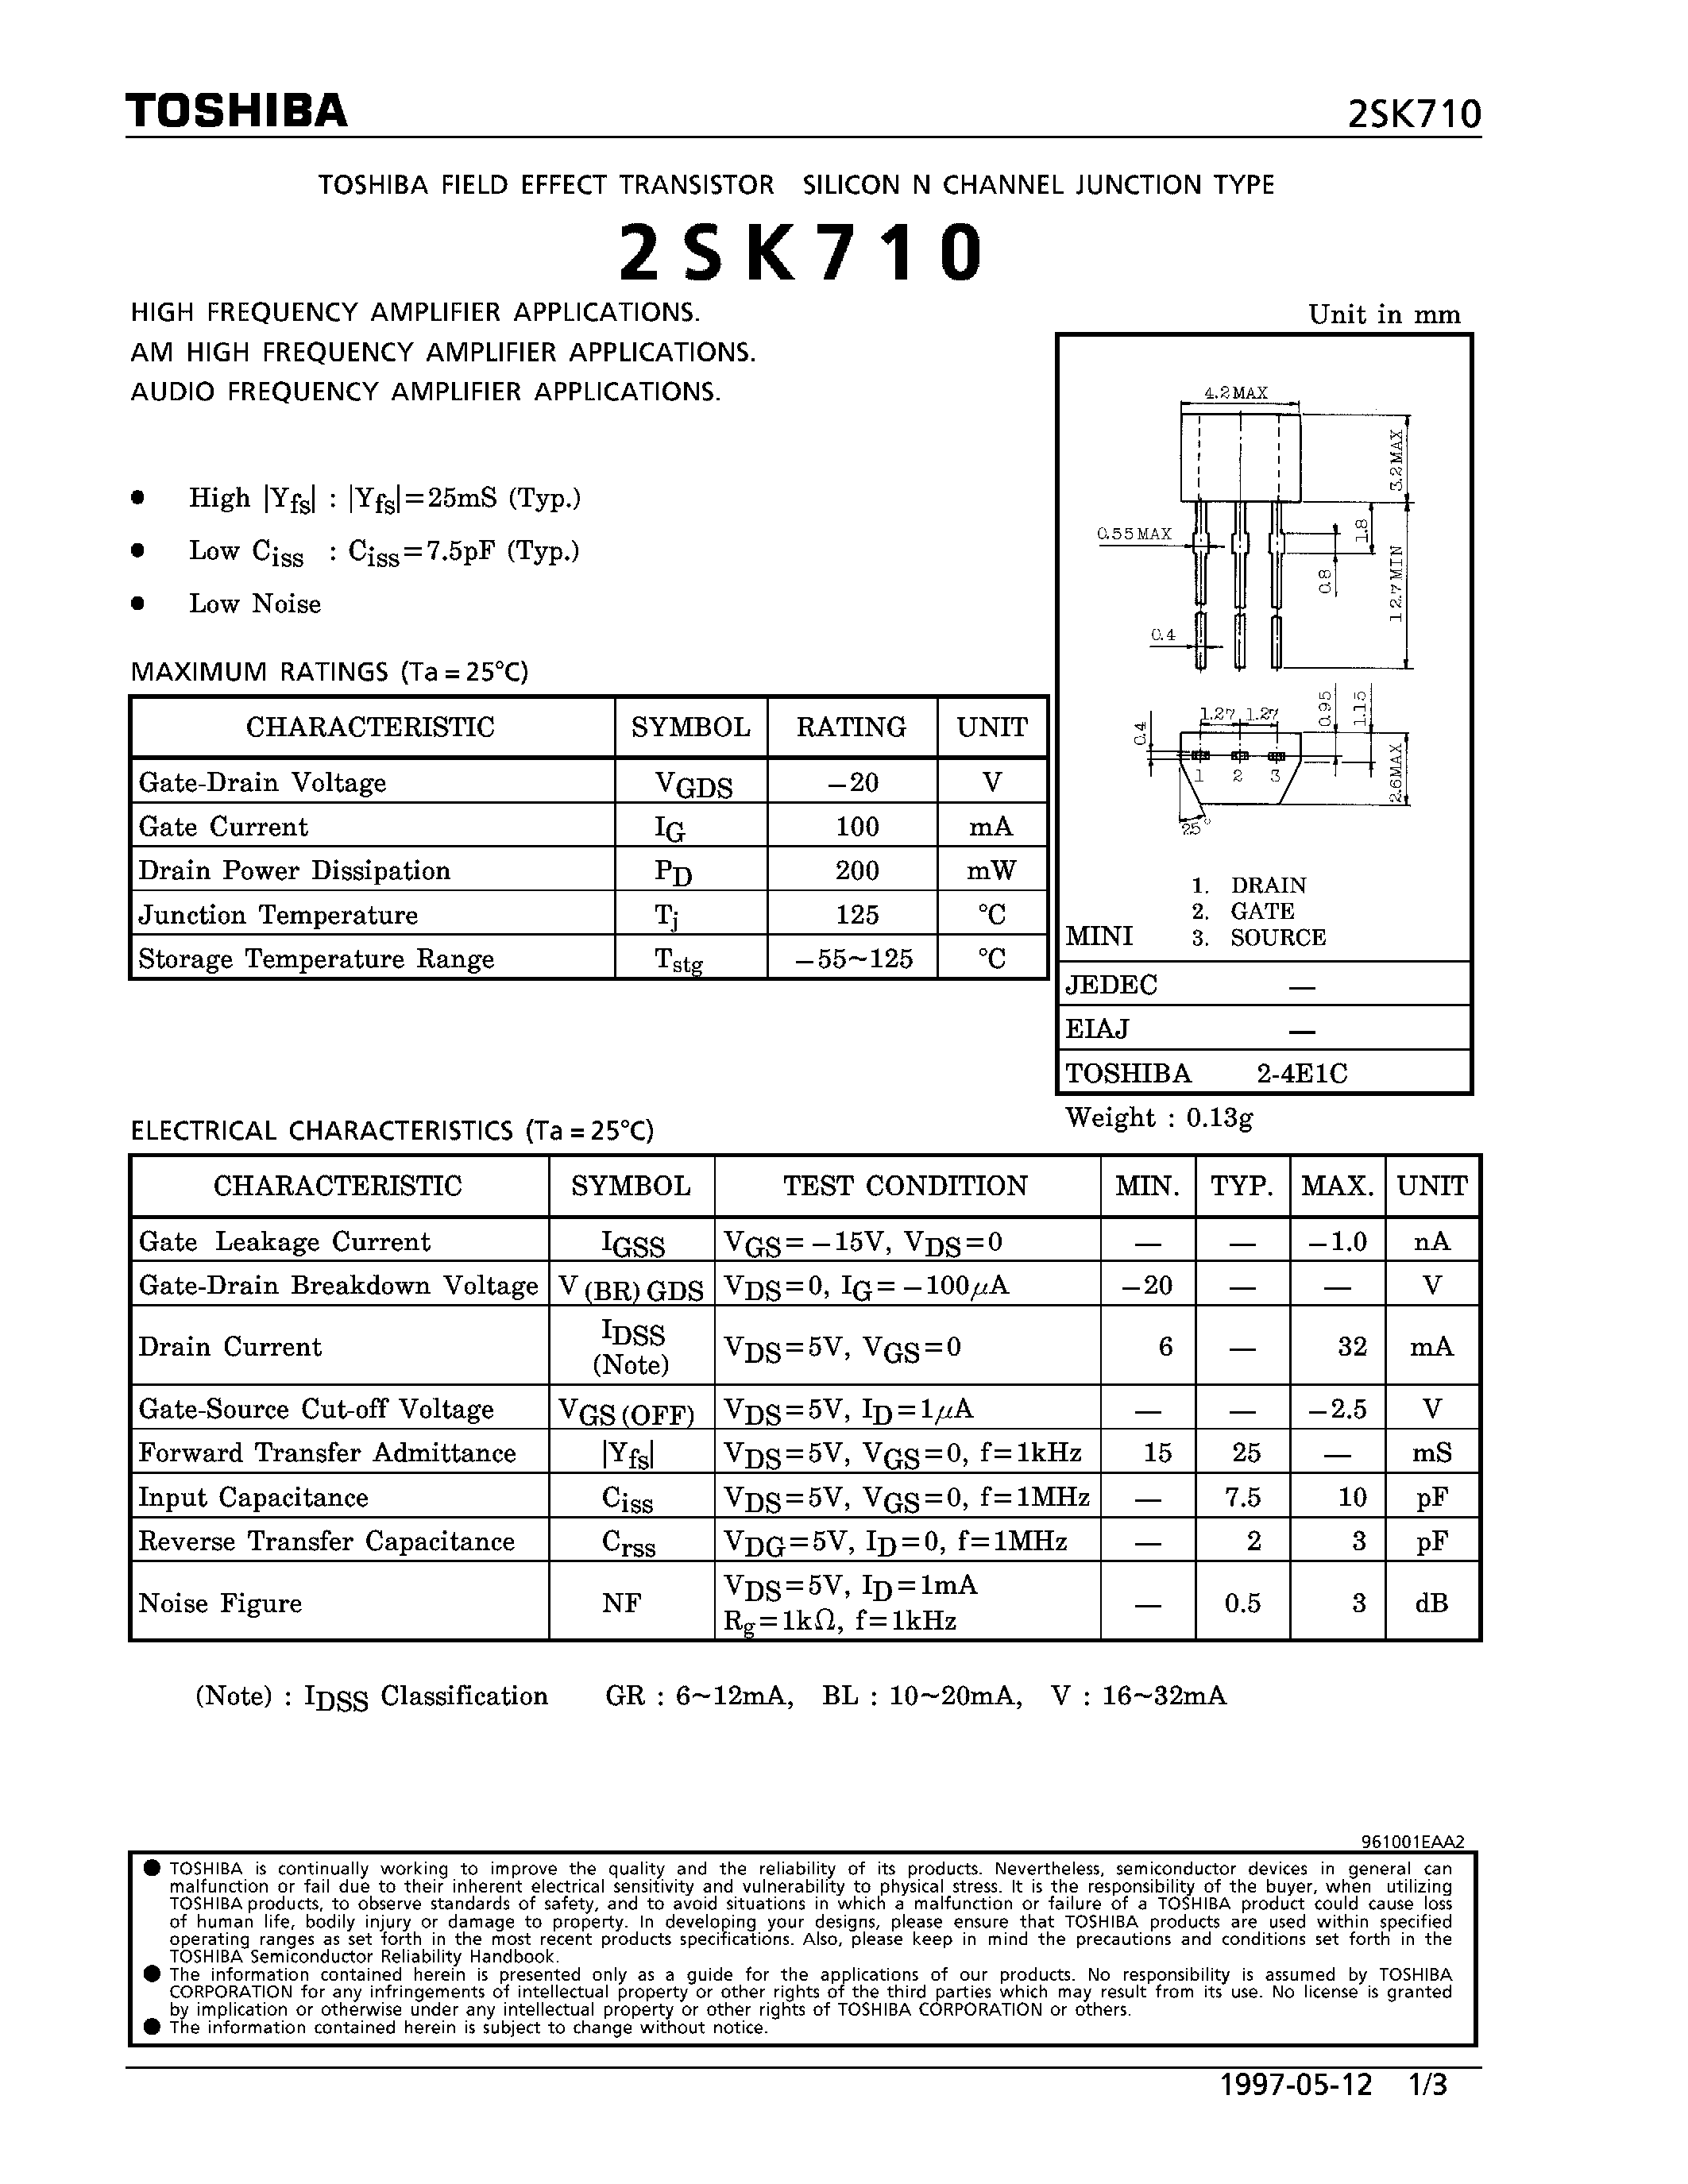 Datasheet SK710 - N CHANNEL JUNCTION TYPE (HIGH/ AM HIGH/ AUDIO FREQUENCY AMPLIFIER APPLICATIONS) page 1